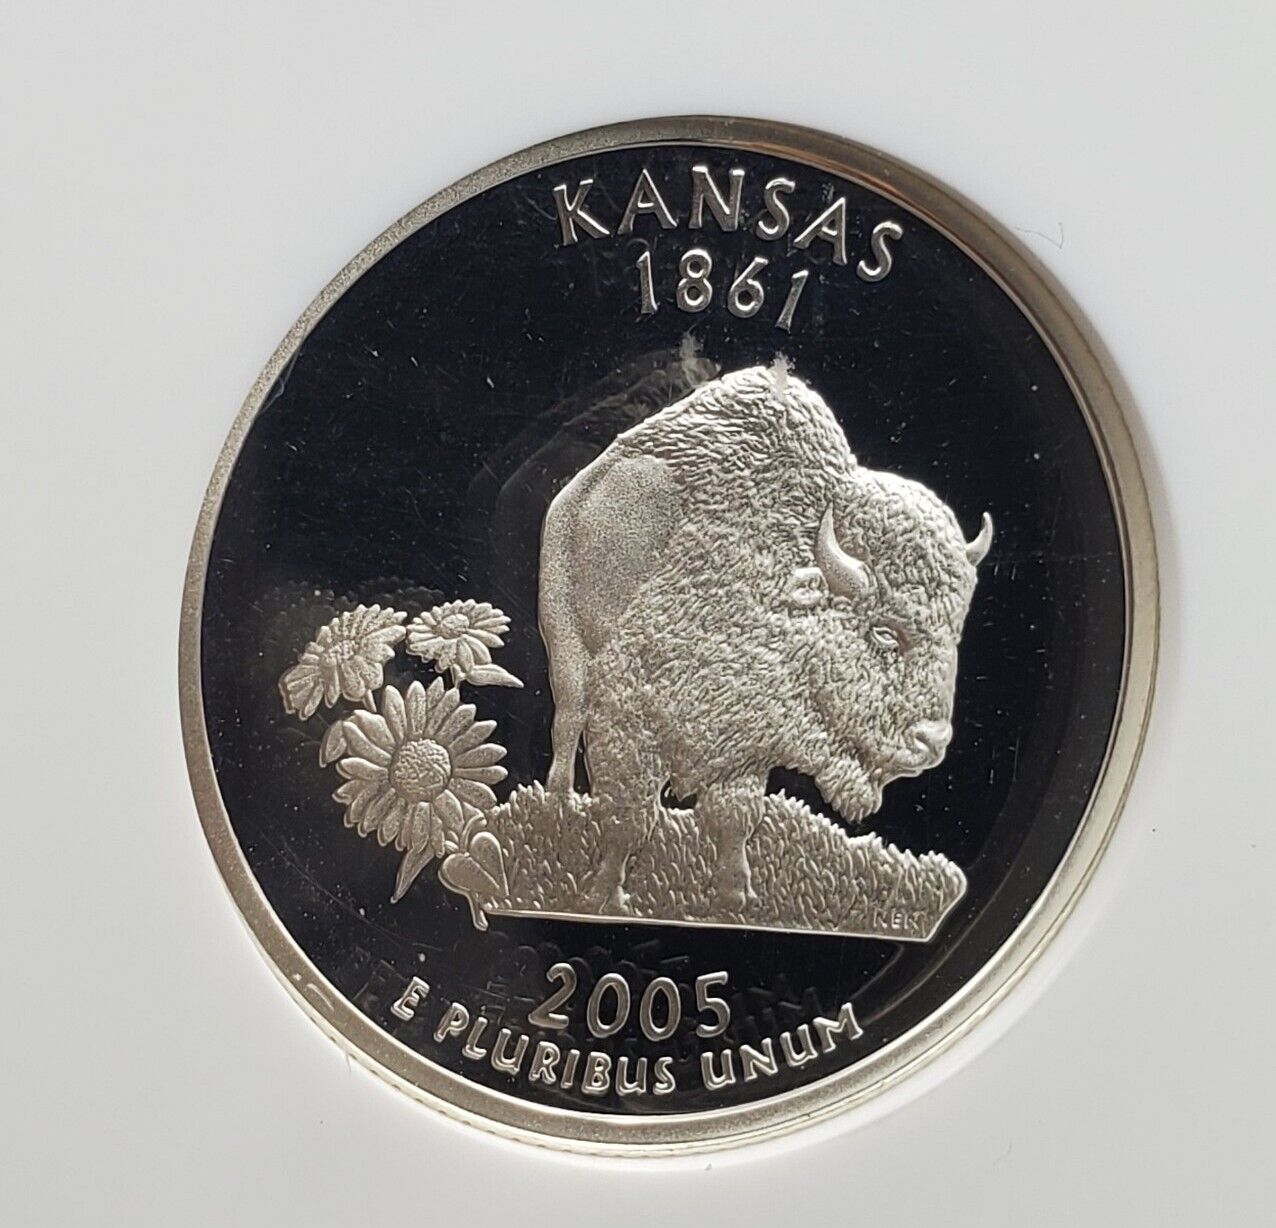 2005 S KANSAS State Statehood Silver Quarter Coin NGC PF69 Ultra Cameo #2